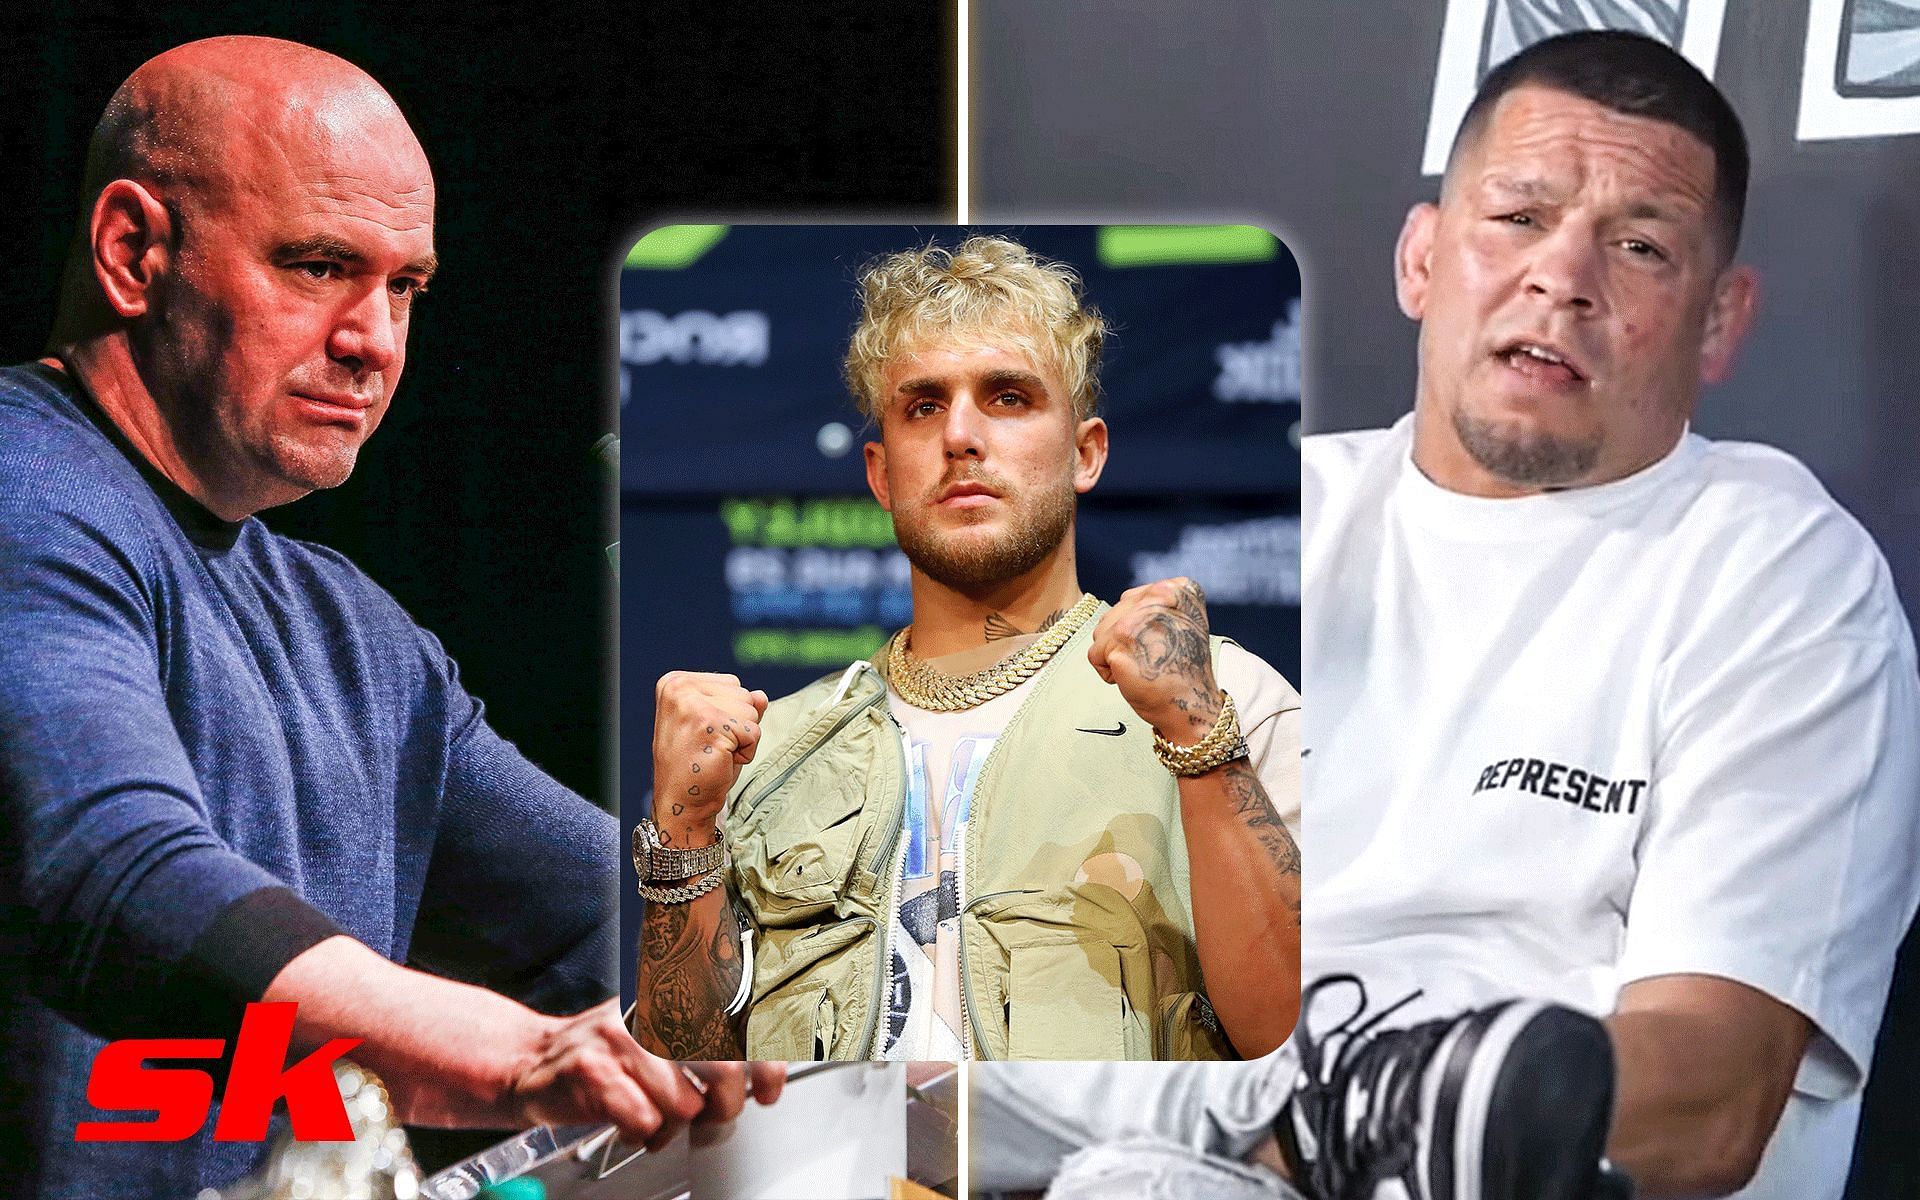 Dana White (Left); Jake Paul (Middle); Nate Diaz (Right) [*Image courtesy: left and middle images via Getty Images; right image via Bradley Martyn